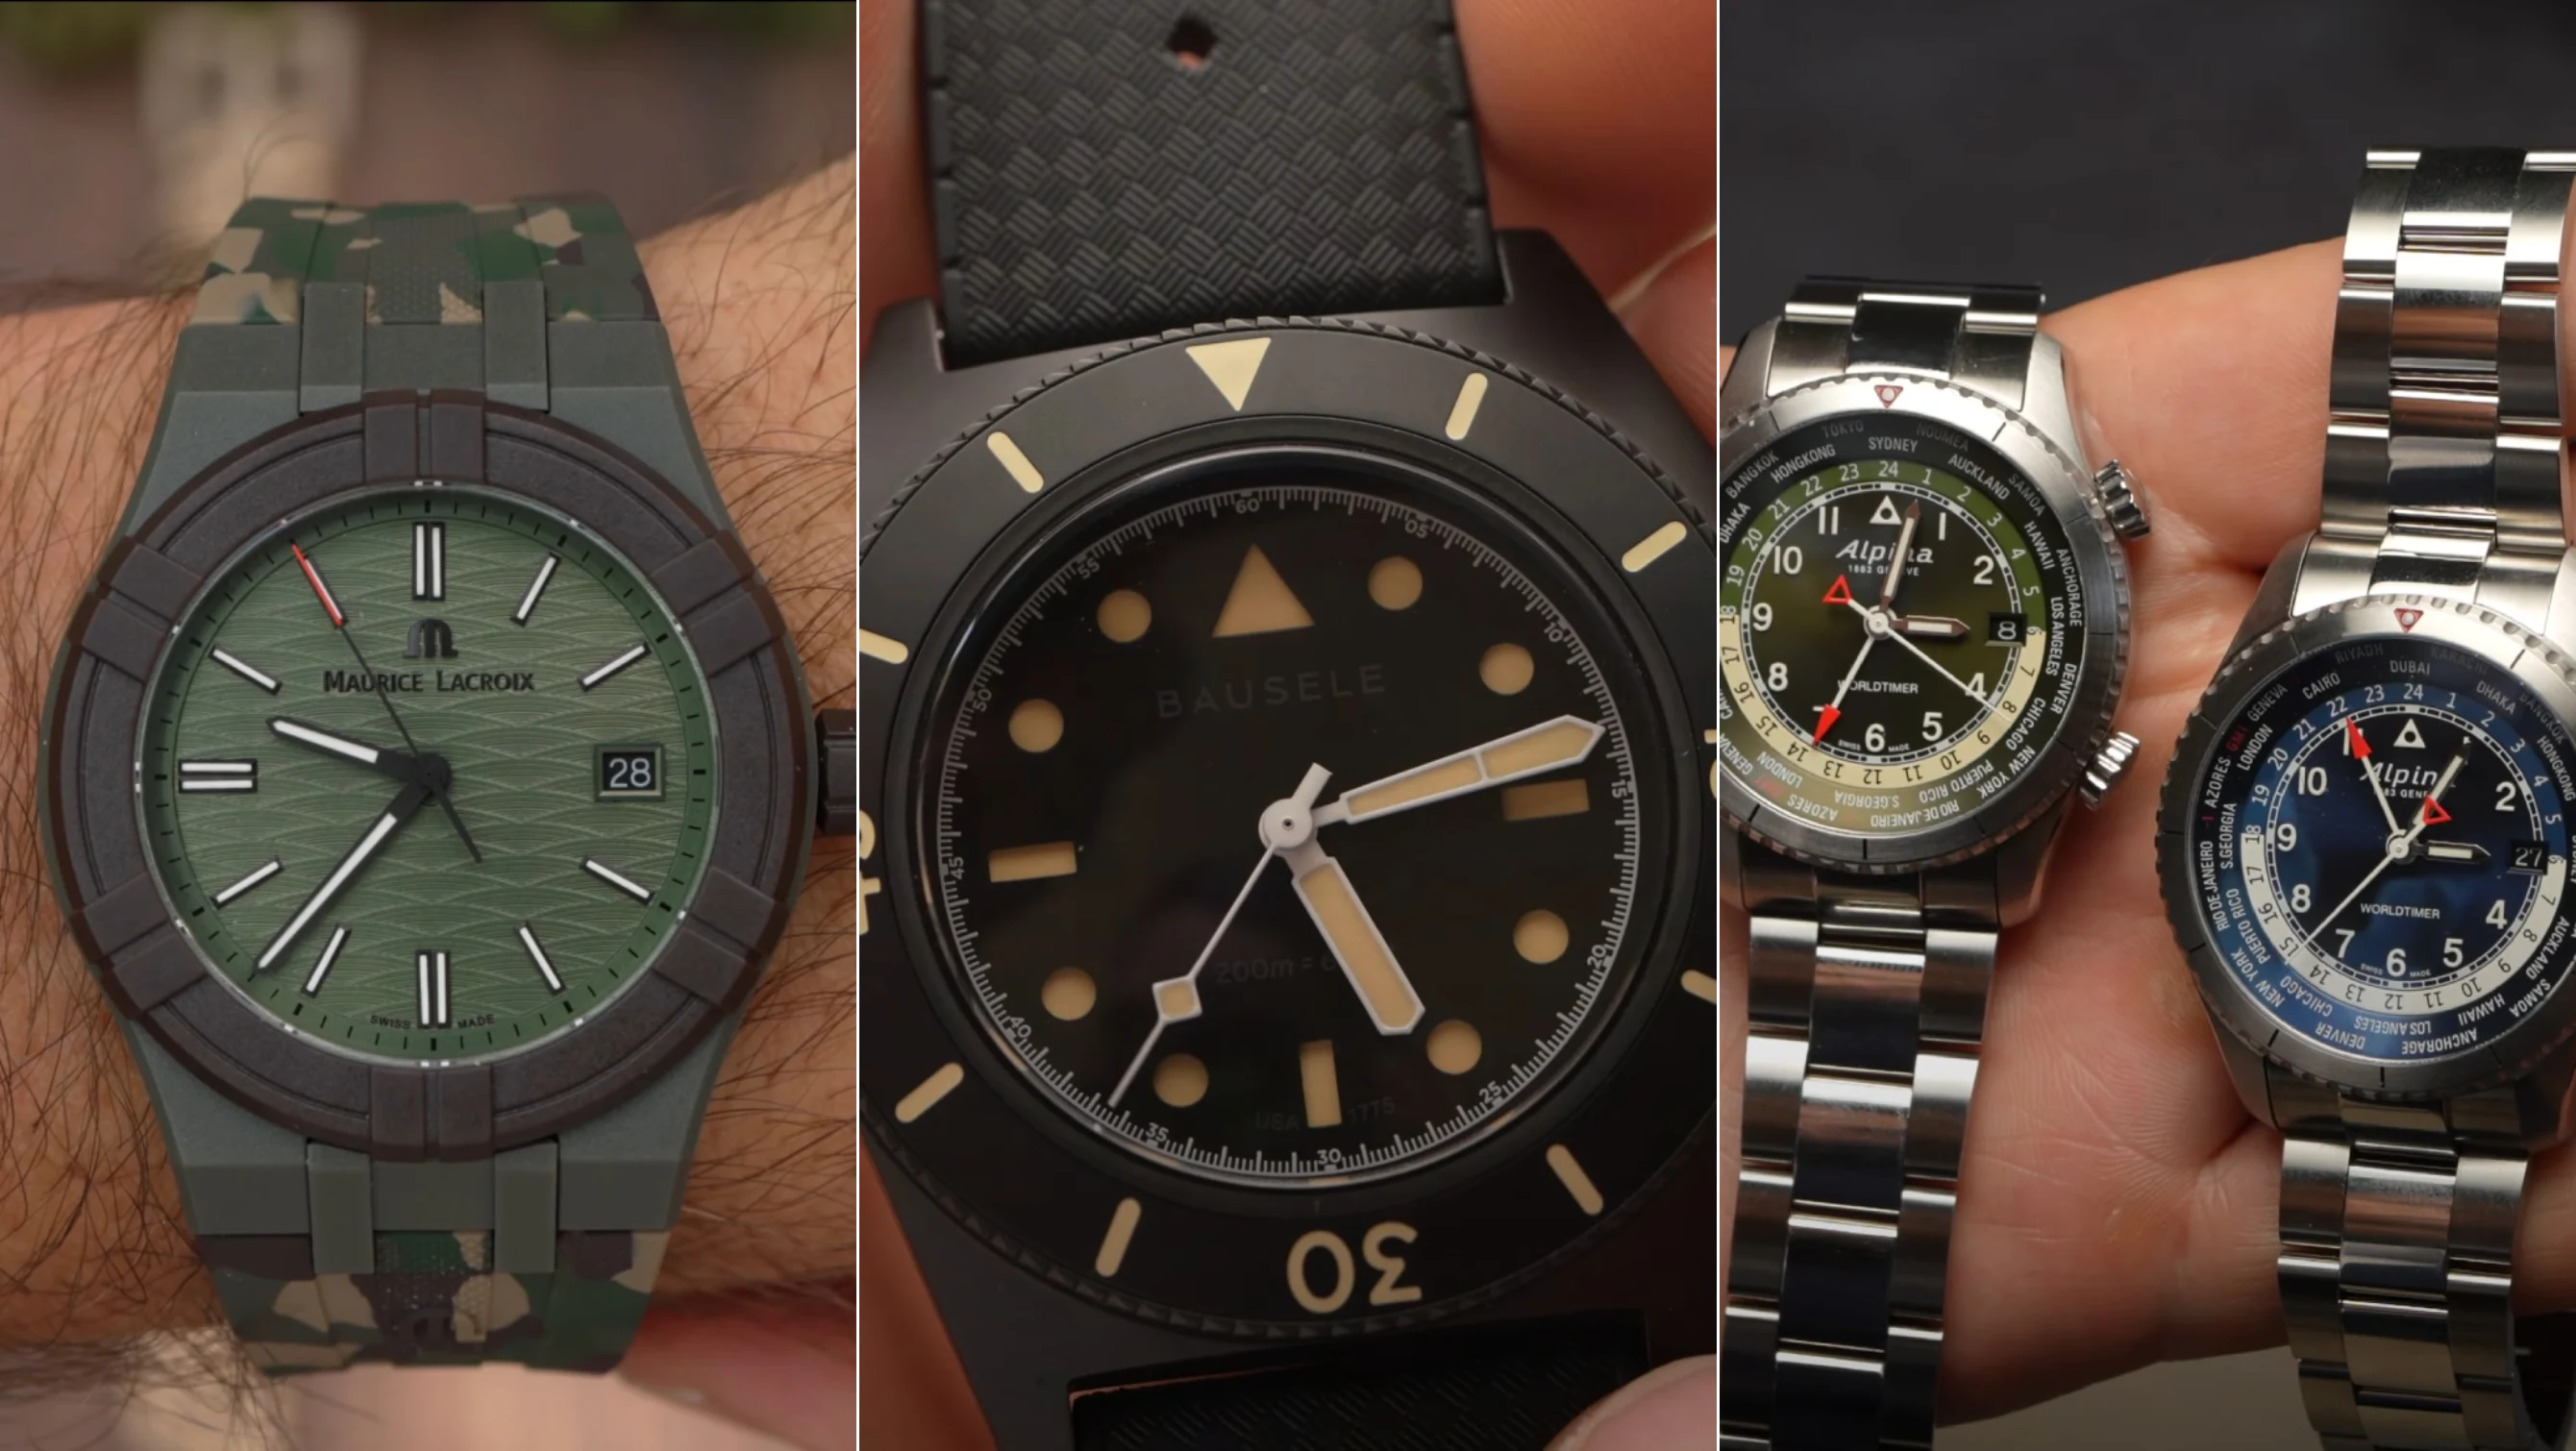 Andrew picks out three new watches under $1,000 from Geneva Watch Days